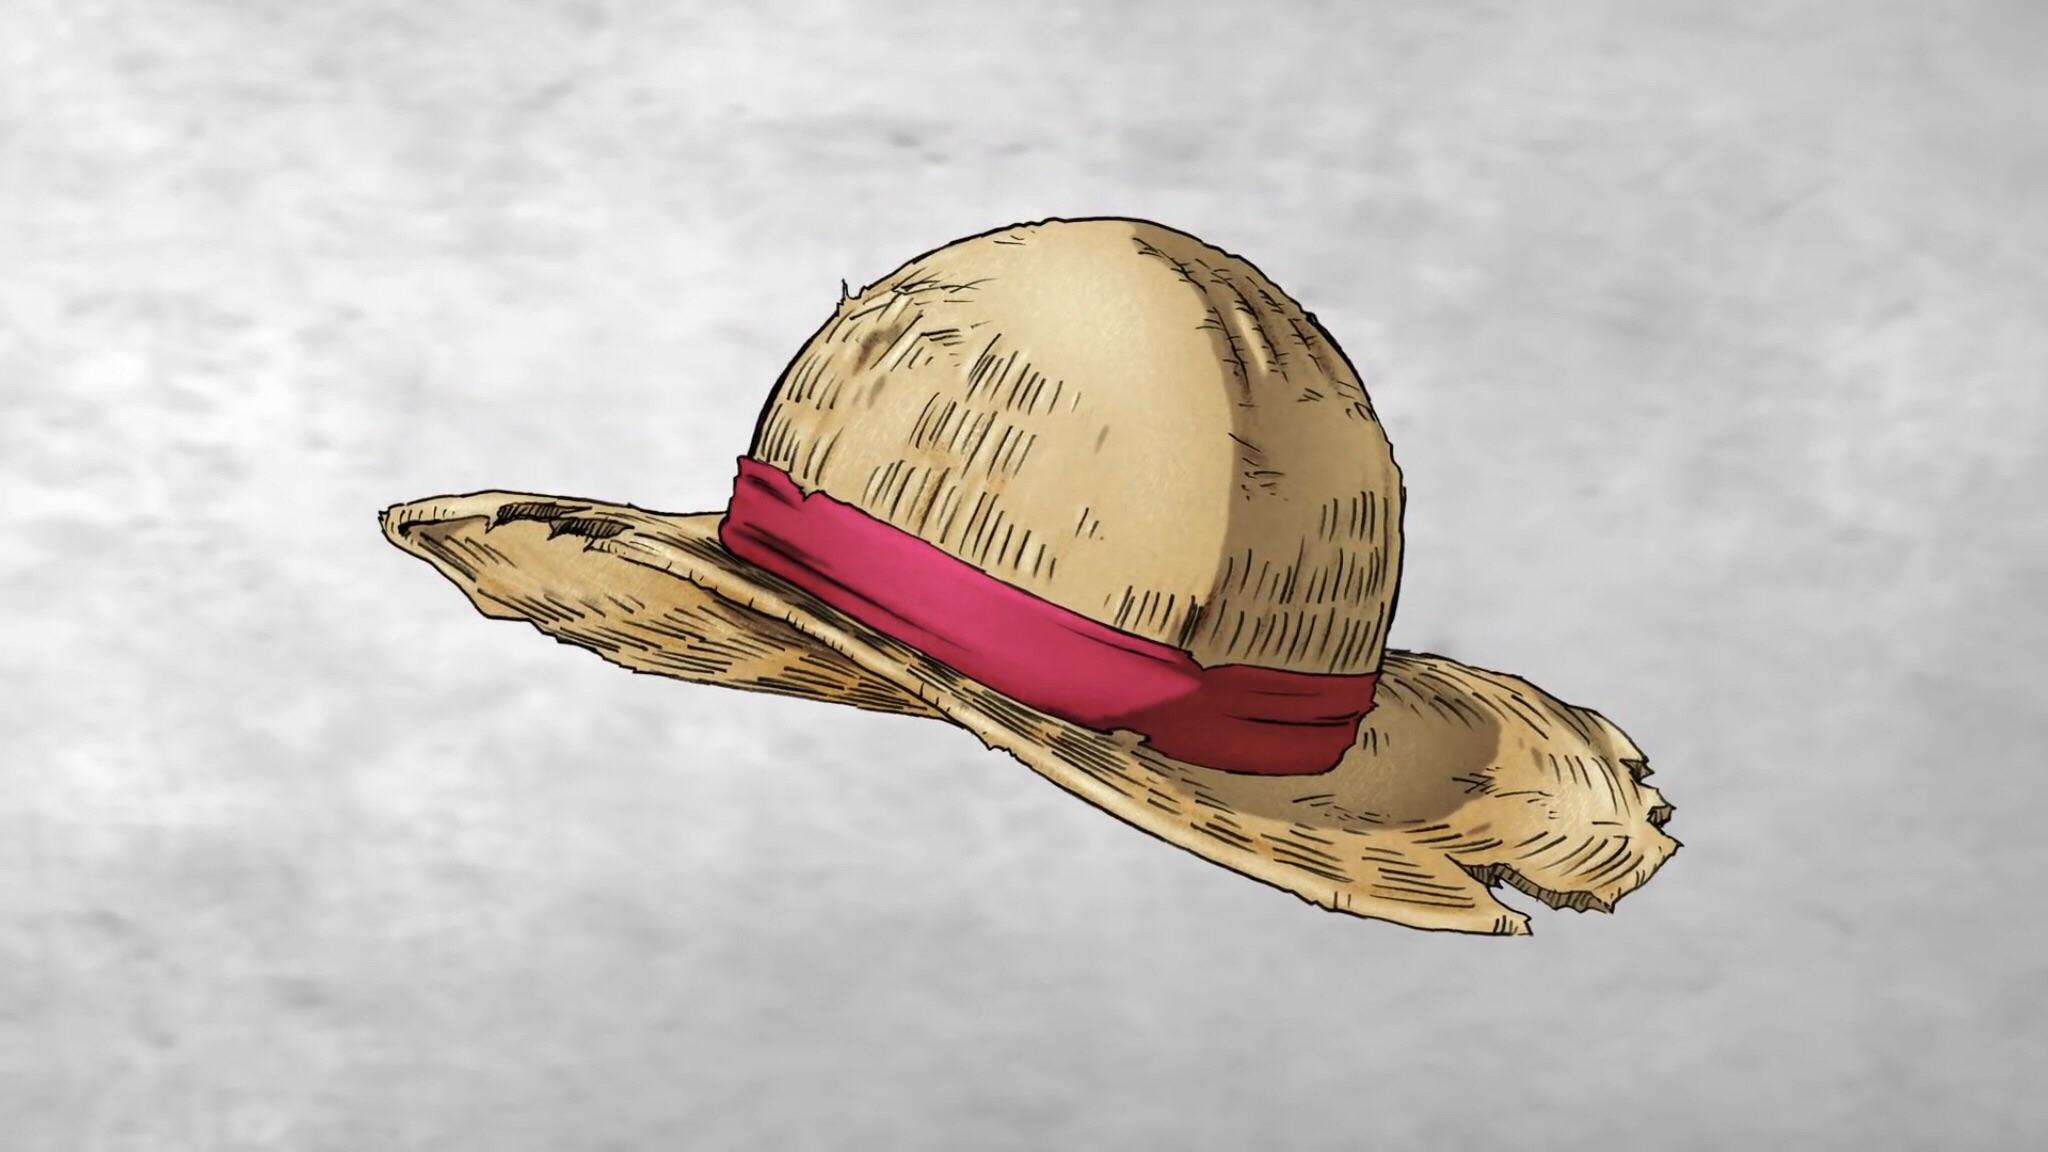 Hd Wallpaper One Piece Straw Hat Logo Png Oldsaws | The Best Porn Website